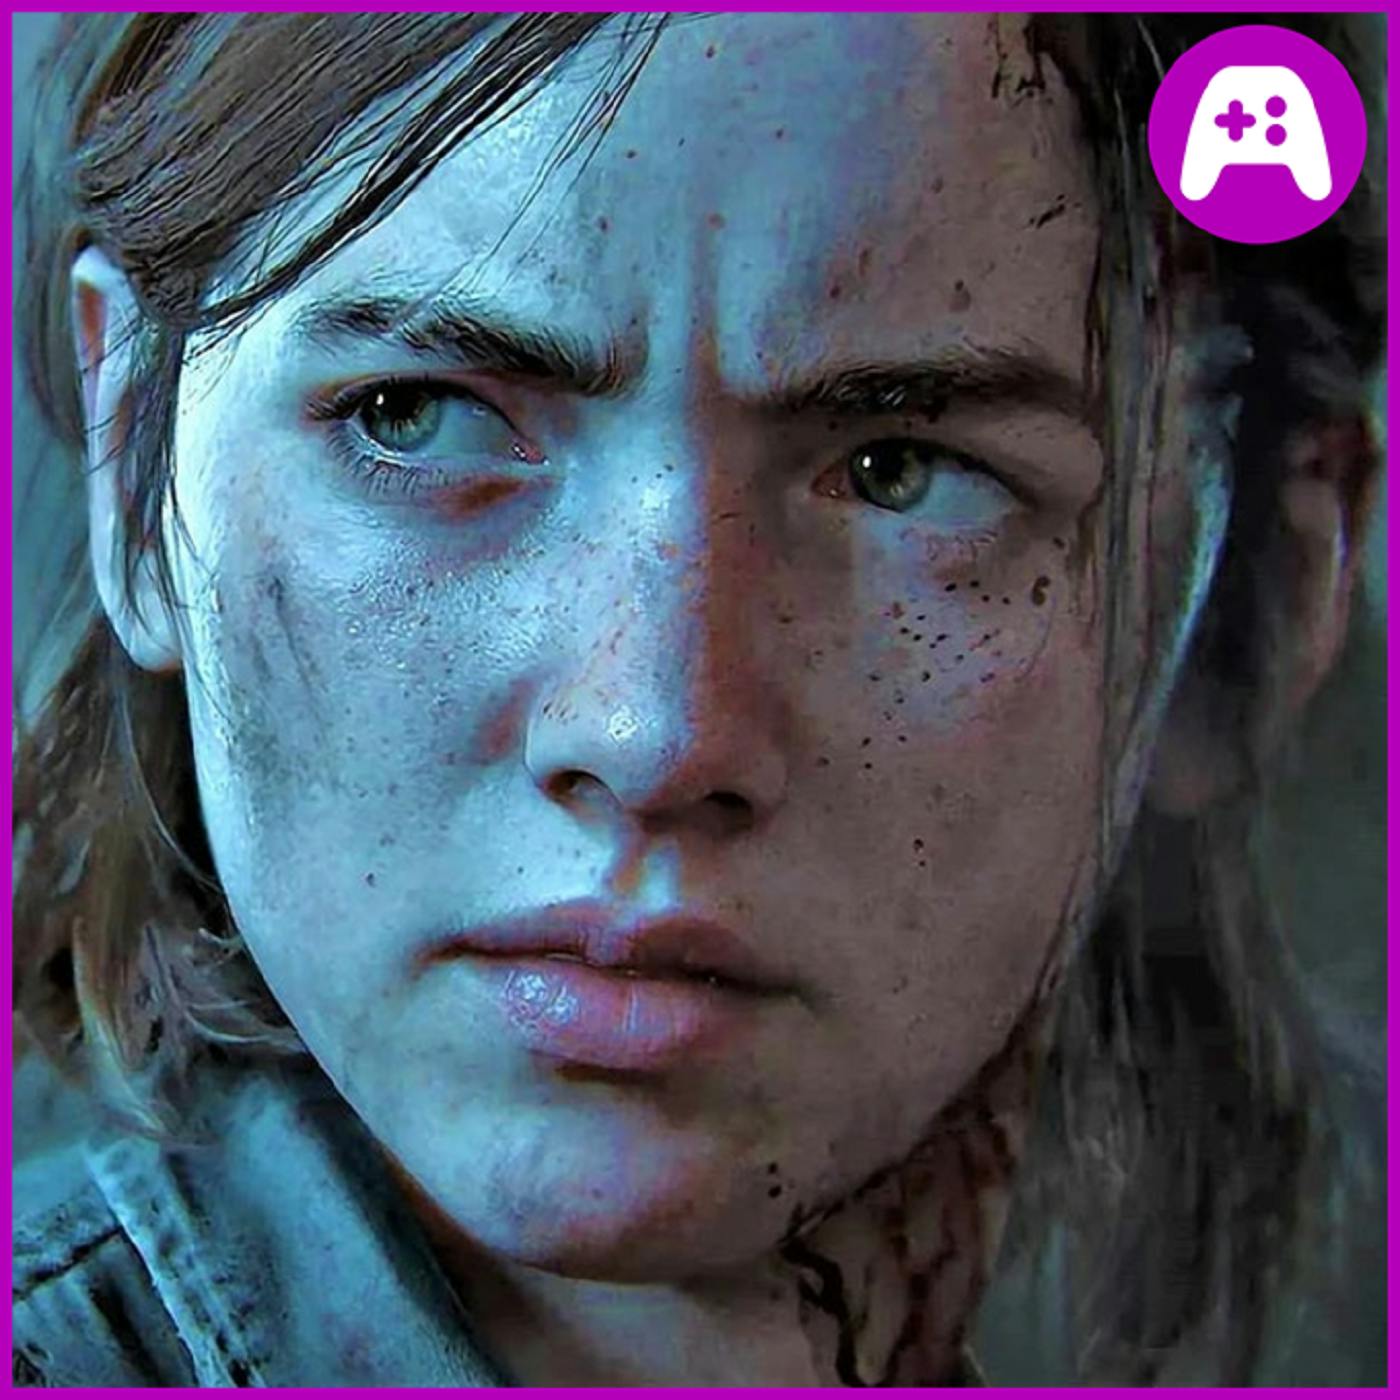 The Last of Us 2 Spoilercast [SPOILERS, DUH] - What’s Good Games (Ep. 171)